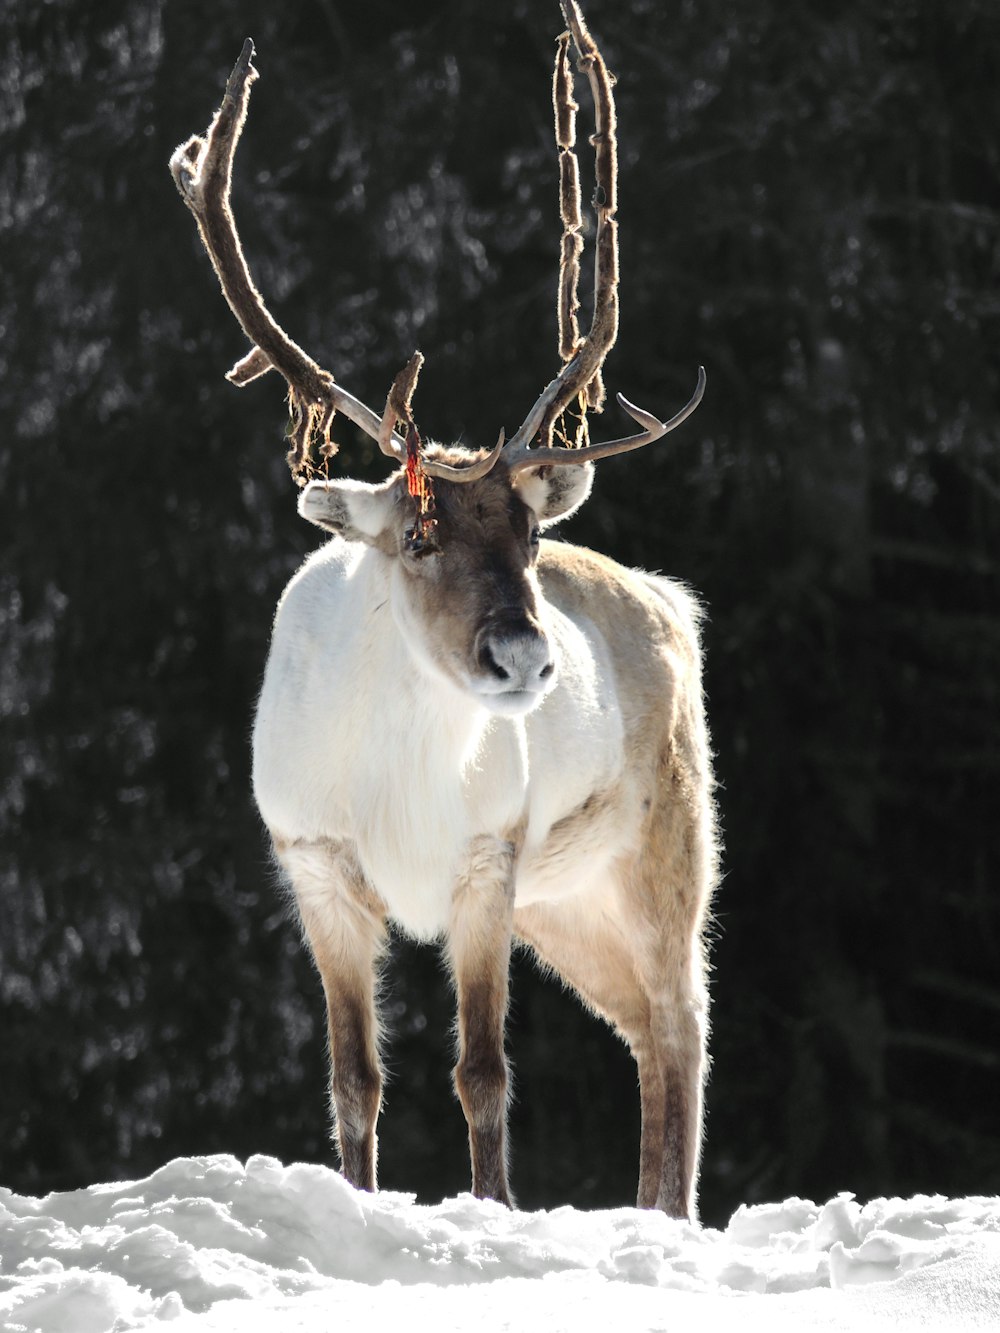 a reindeer with antlers standing in the snow